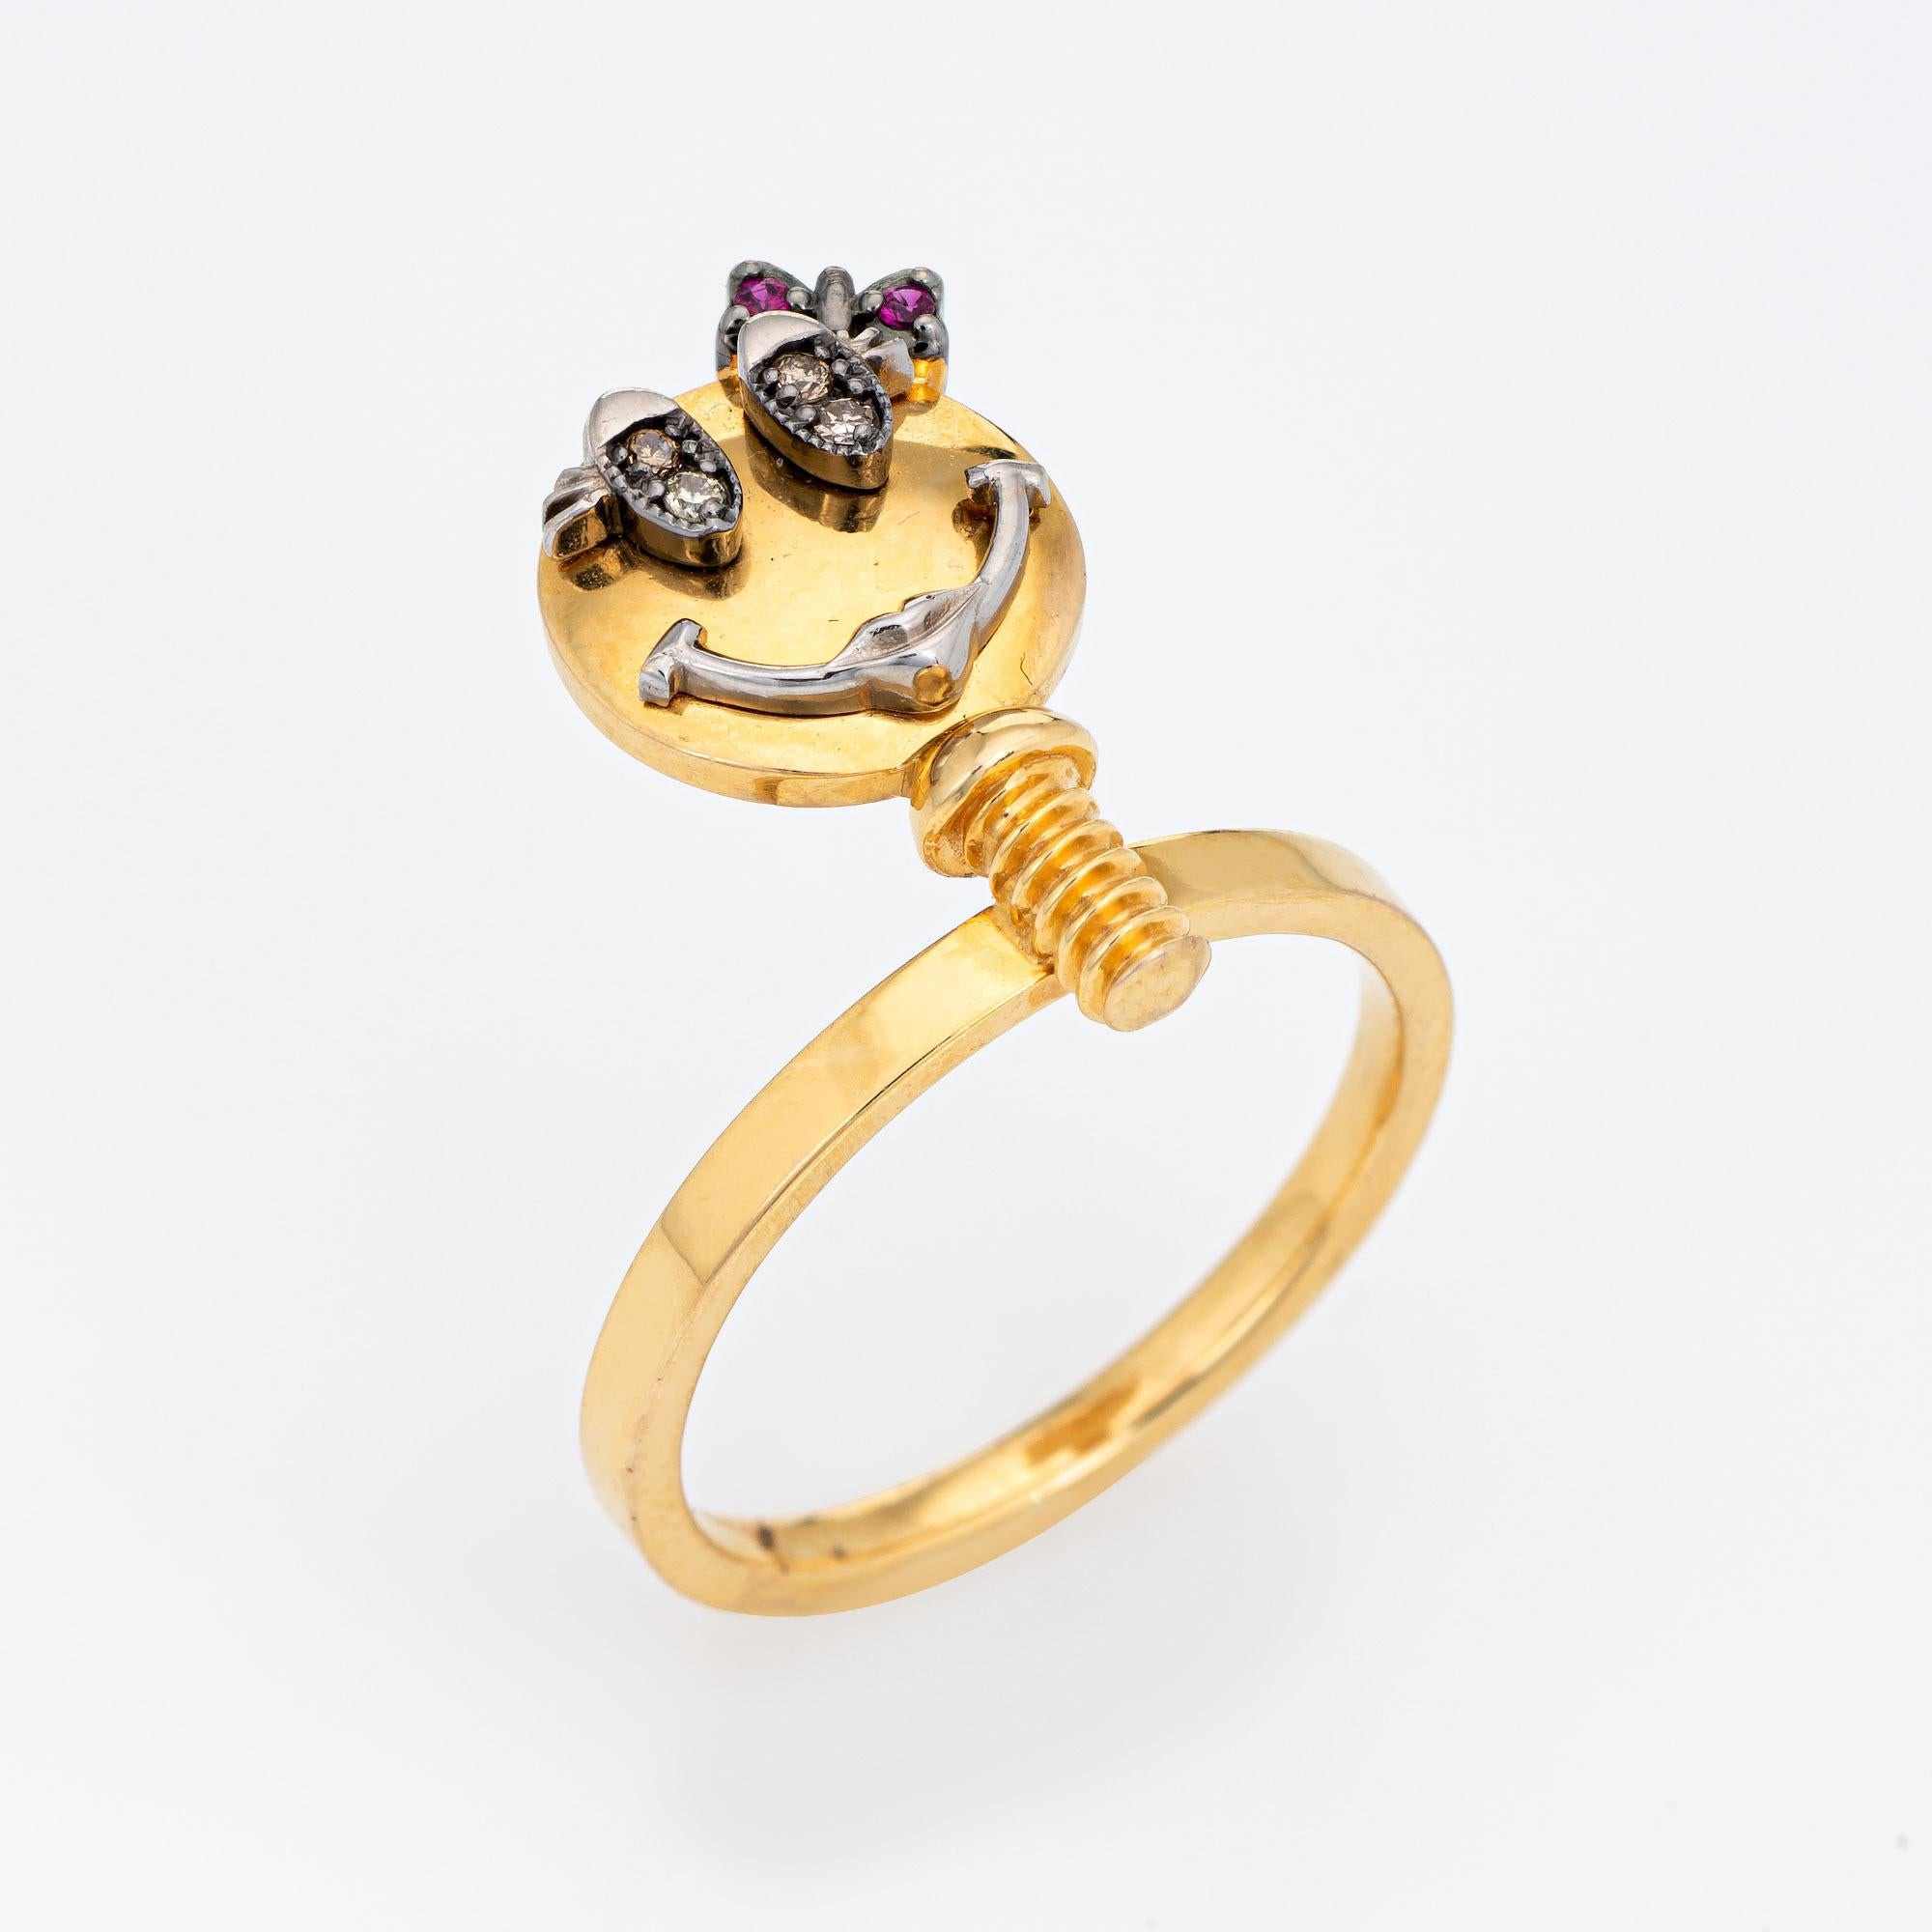 Stylish Sally Sohn happy face ring crafted in 18 karat yellow gold. 

Diamonds total an estimated 0.02 carats and rubies total an estimated 0.01 carats.  

Sally Sohn is a South Korean jewelry designer known for one-of-a-kind wearable works of art.